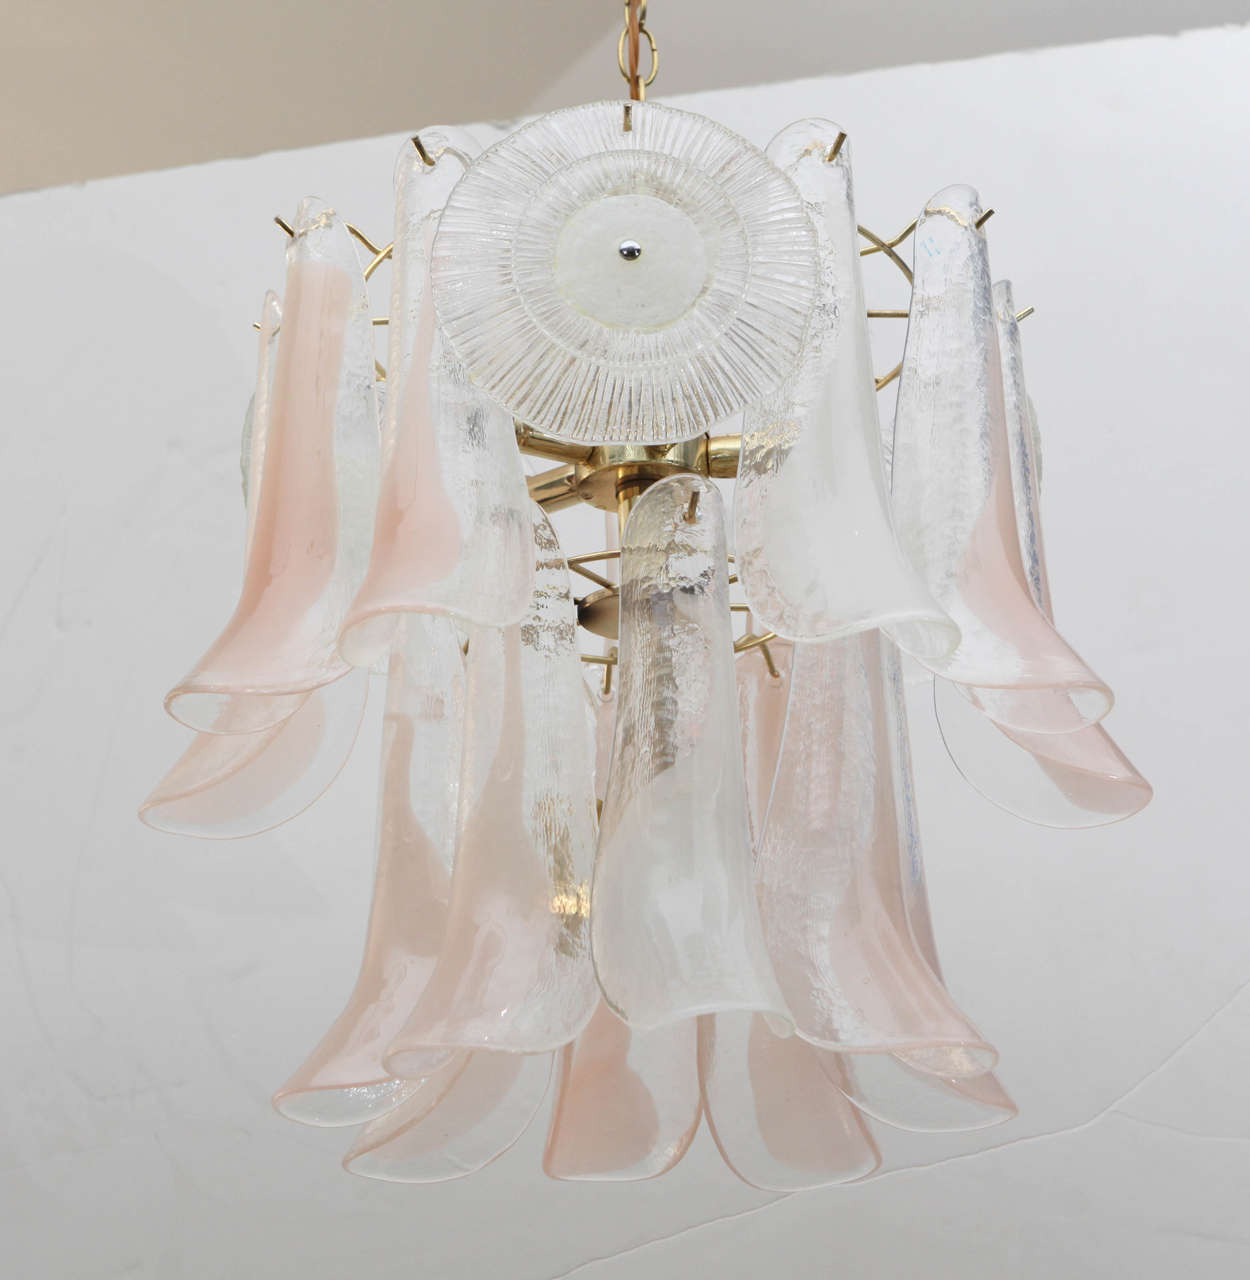 Pale pink Murano glass petals and off-white disks adorn a brass skeleton creating the graceful silhouette of this 1960s Italian chandelier.